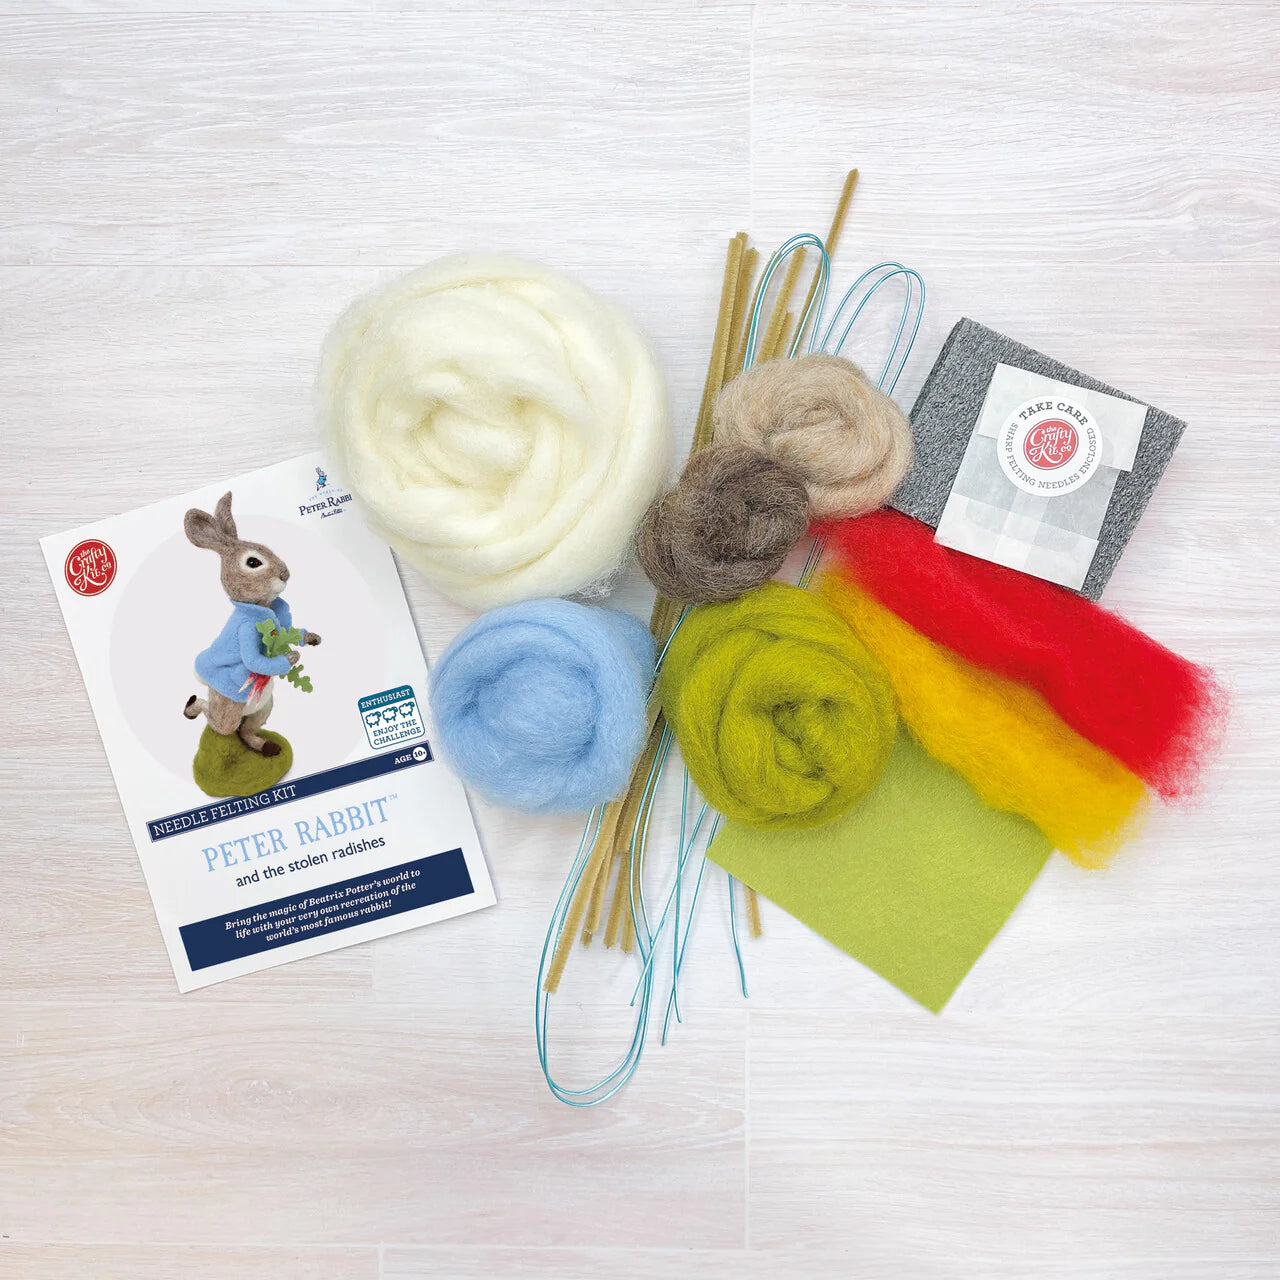 Peter Rabbit and the stolen radishes Needle Felting Kit from The Crafty Kit Company